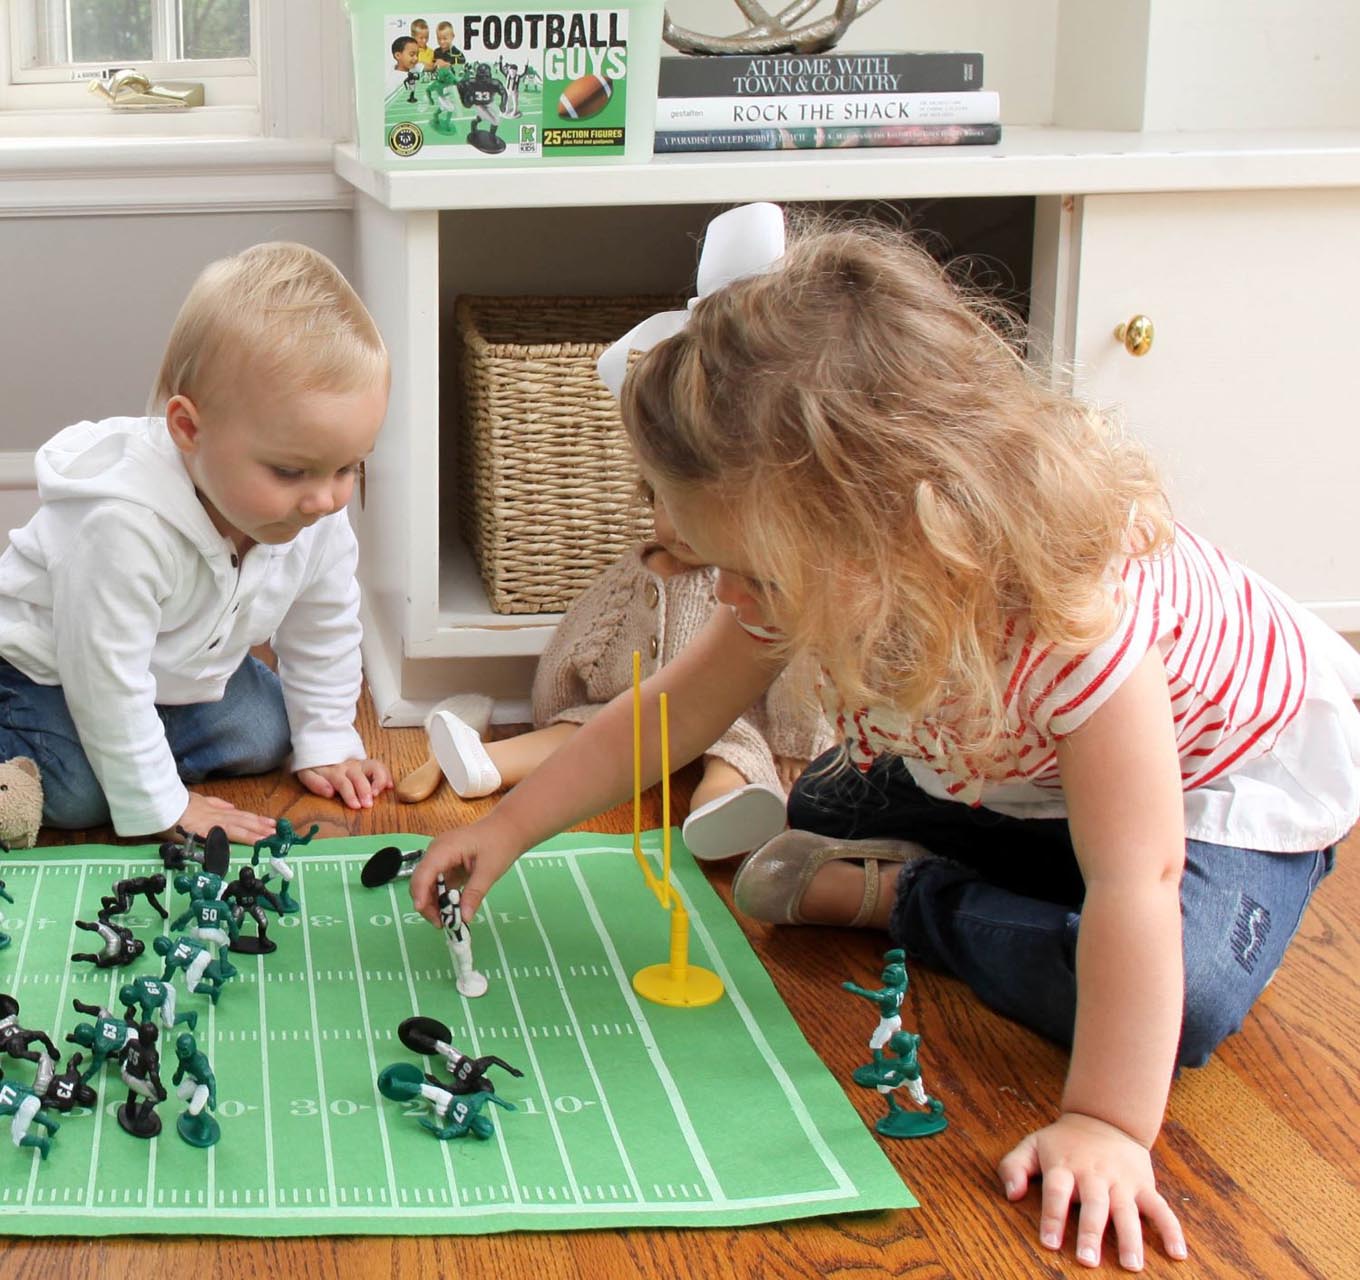 Red & White/Navy & White Inspires Kids Imaginations with Endless Hours of Creative Includes 2 Teams & Accessories Open-Ended Play Kaskey Kids Football Guys 28 Pieces in Every Set! 